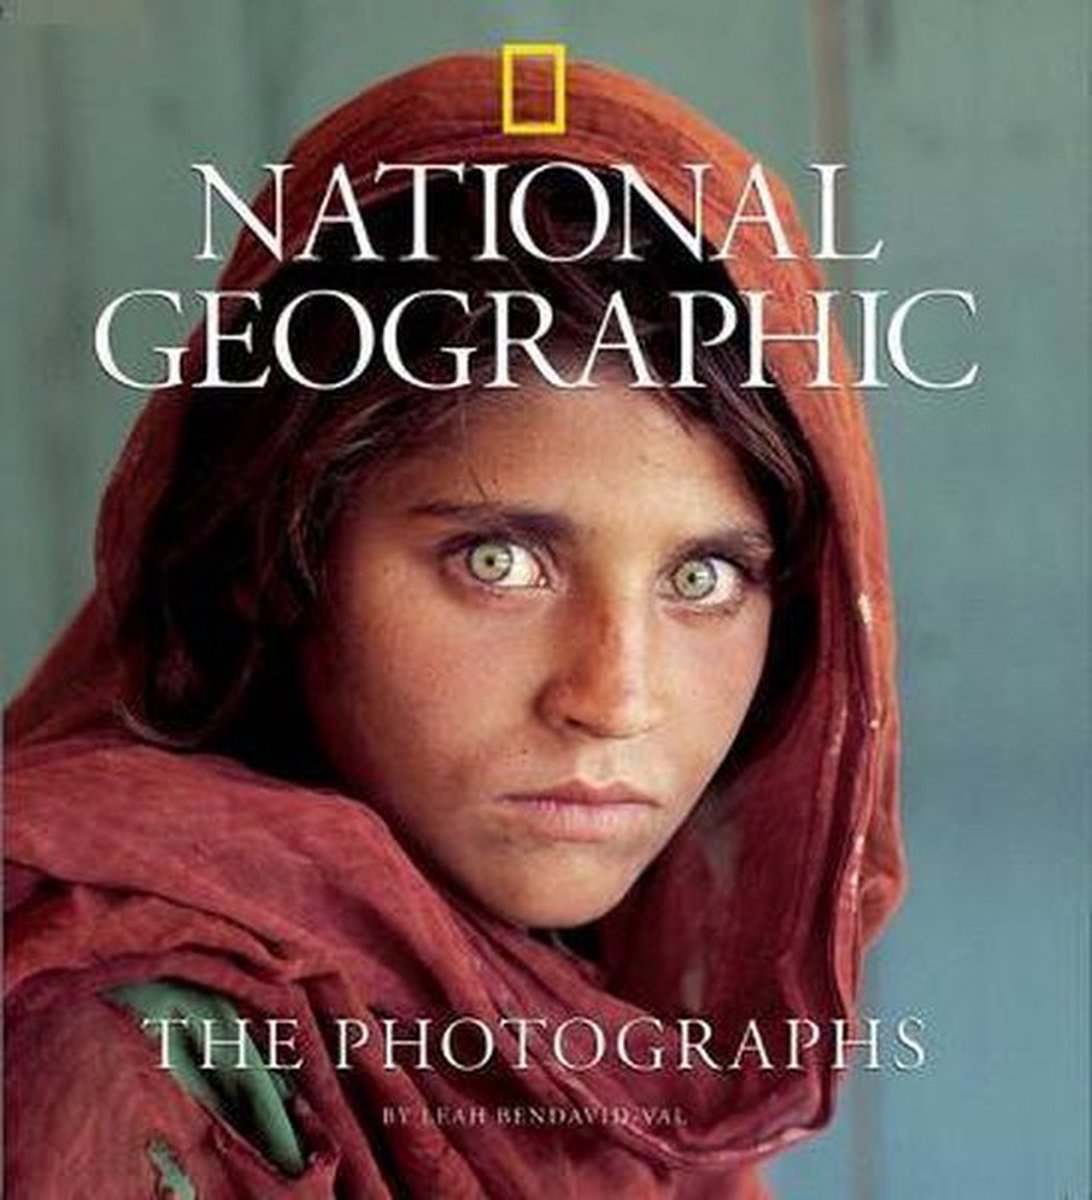 National Geographic The Photographs - Leah Bendavid-Val